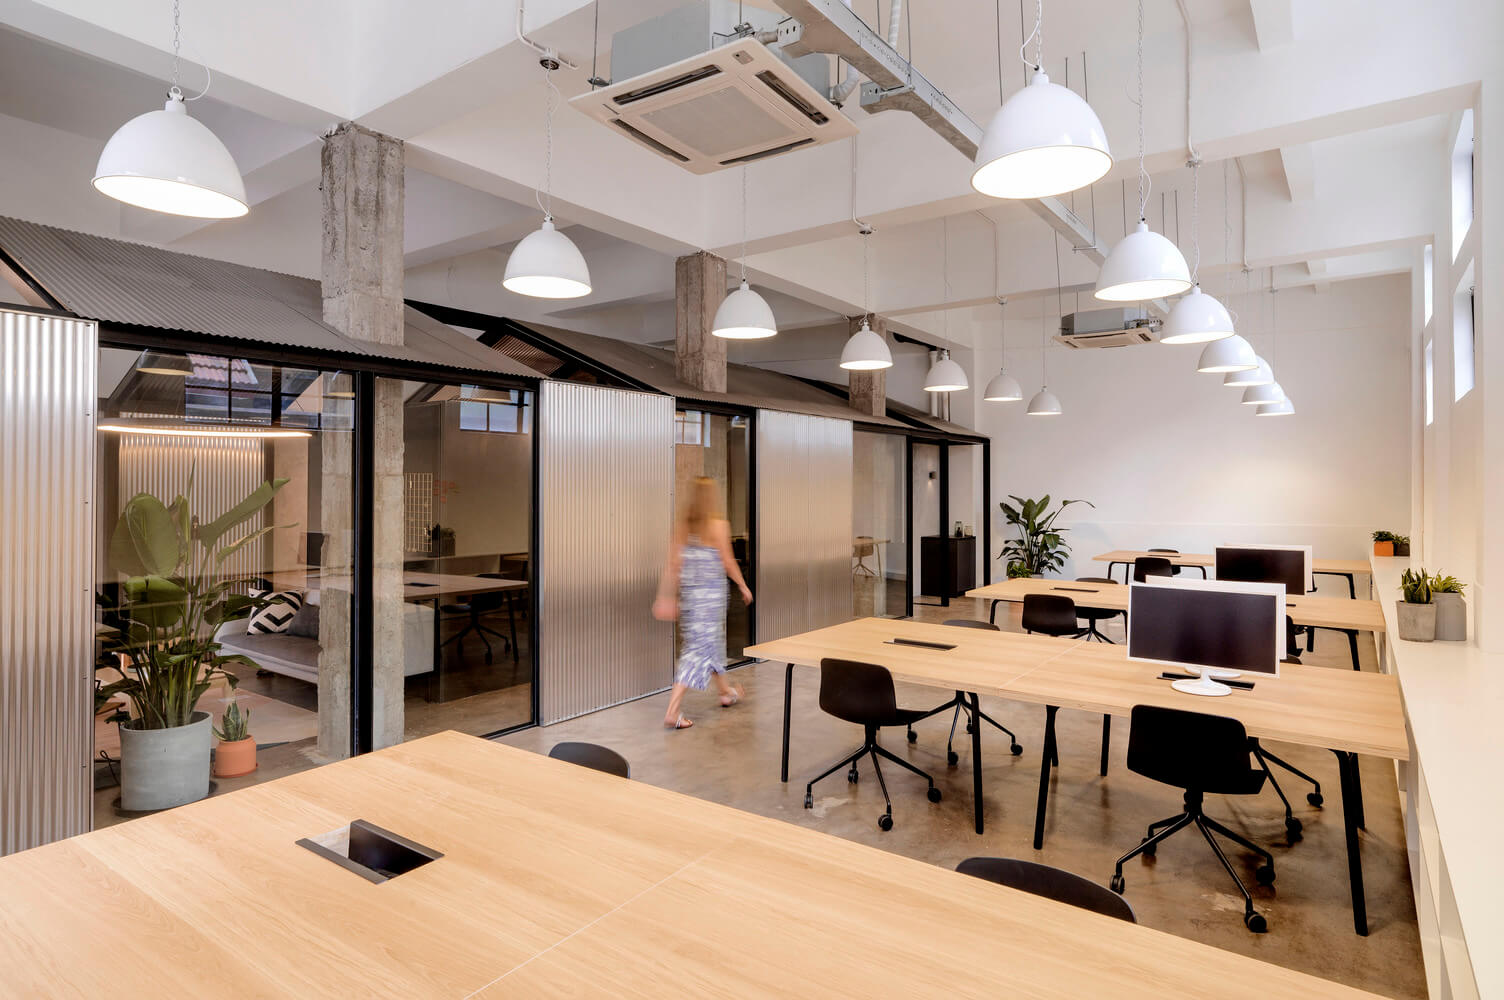 White dome industrial high bay LED lights hang from the ceiling in a contemporary office